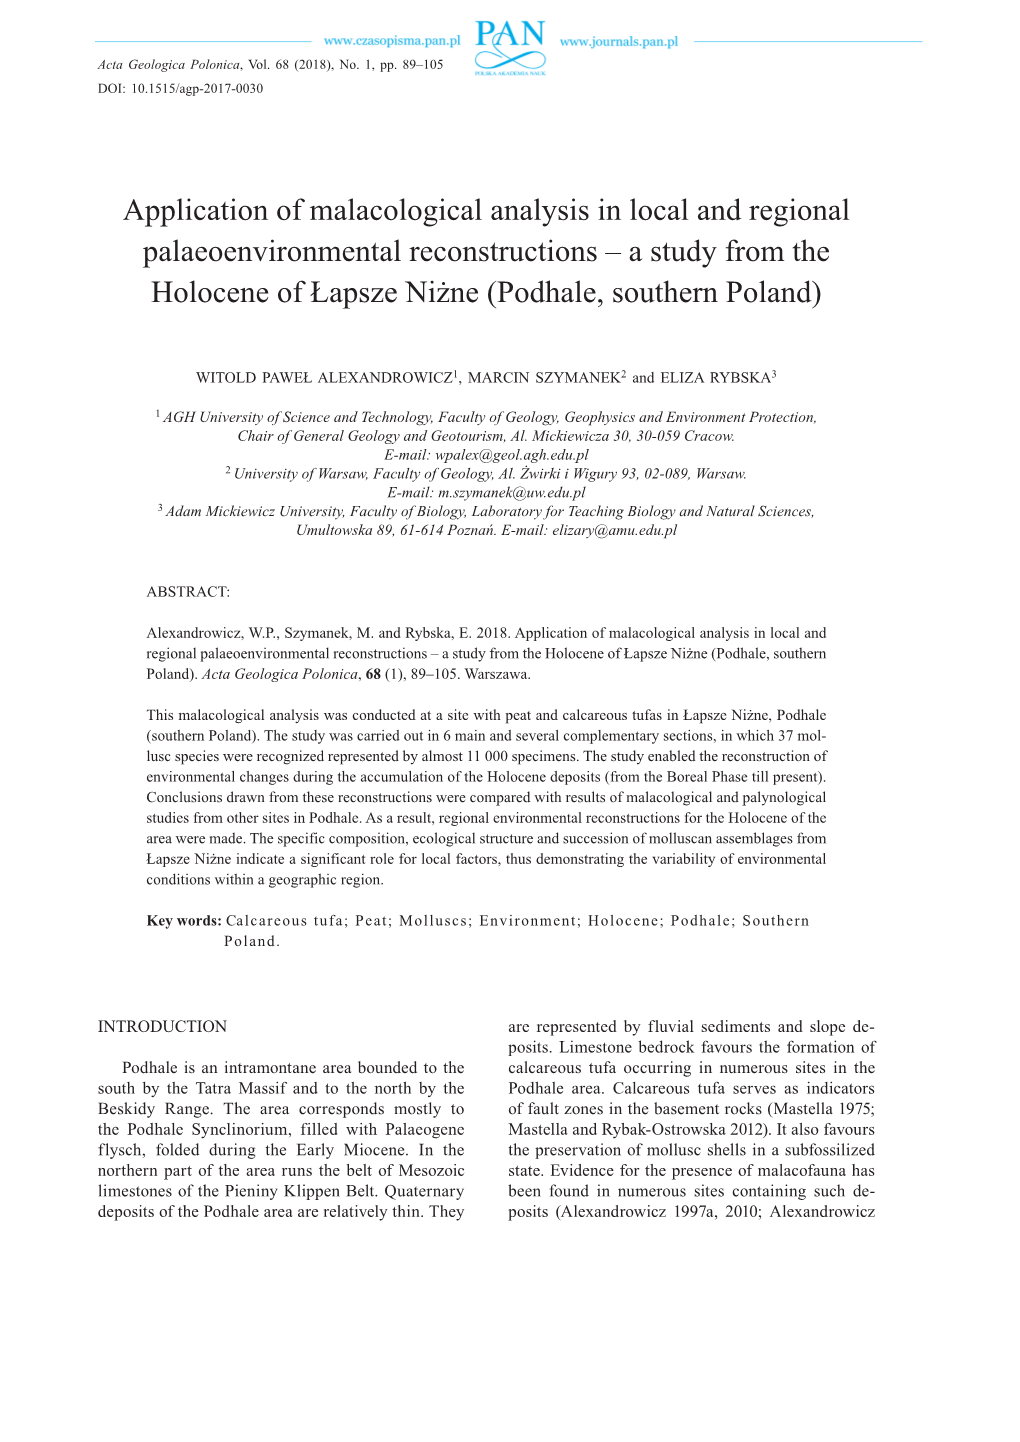 Application of Malacological Analysis in Local and Regional Palaeoenvironmental Reconstructions – a Study from the Holocene of Łapsze Niżne (Podhale, Southern Poland)